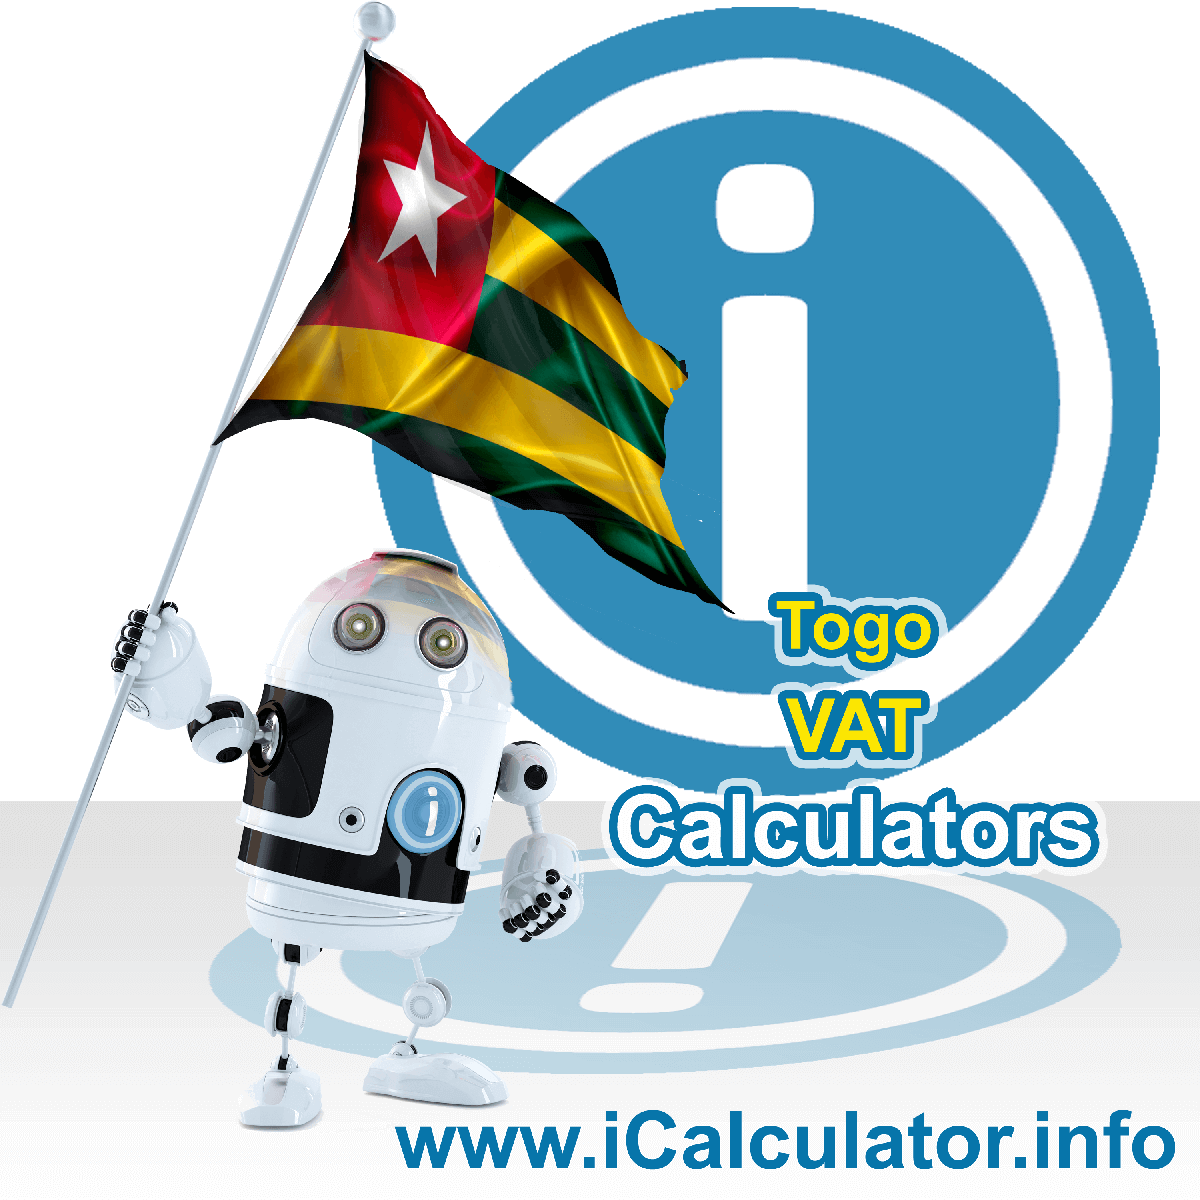 Togo VAT Calculator. This image shows the Togo flag and information relating to the VAT formula used for calculating Value Added Tax in Togo using the Togo VAT Calculator in 2023